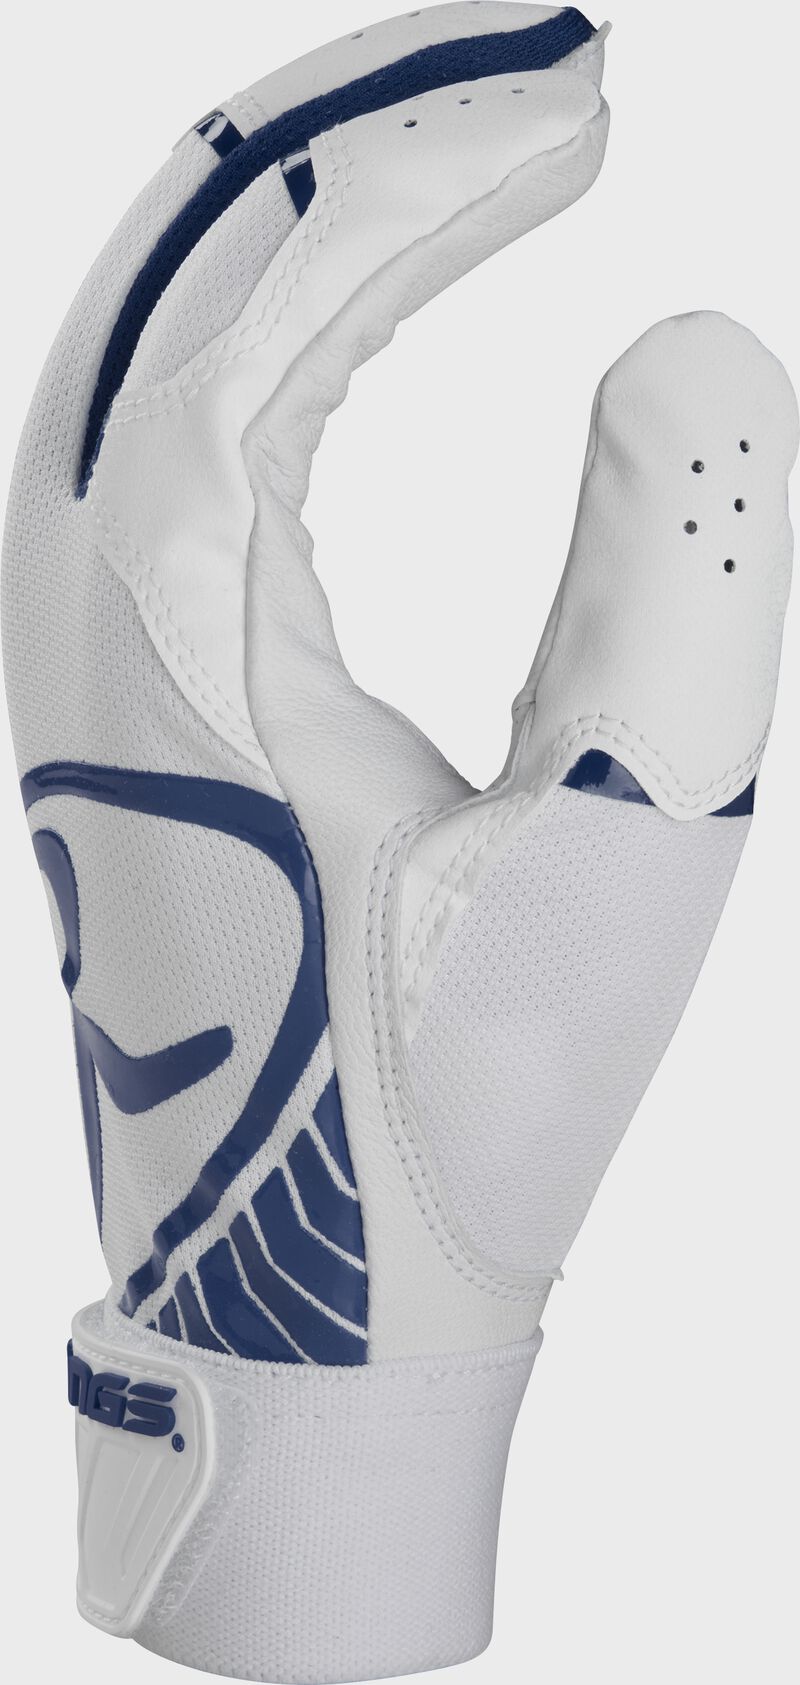 2021 Rawlings 5150 Batting Gloves, Adult & Youth Sizes